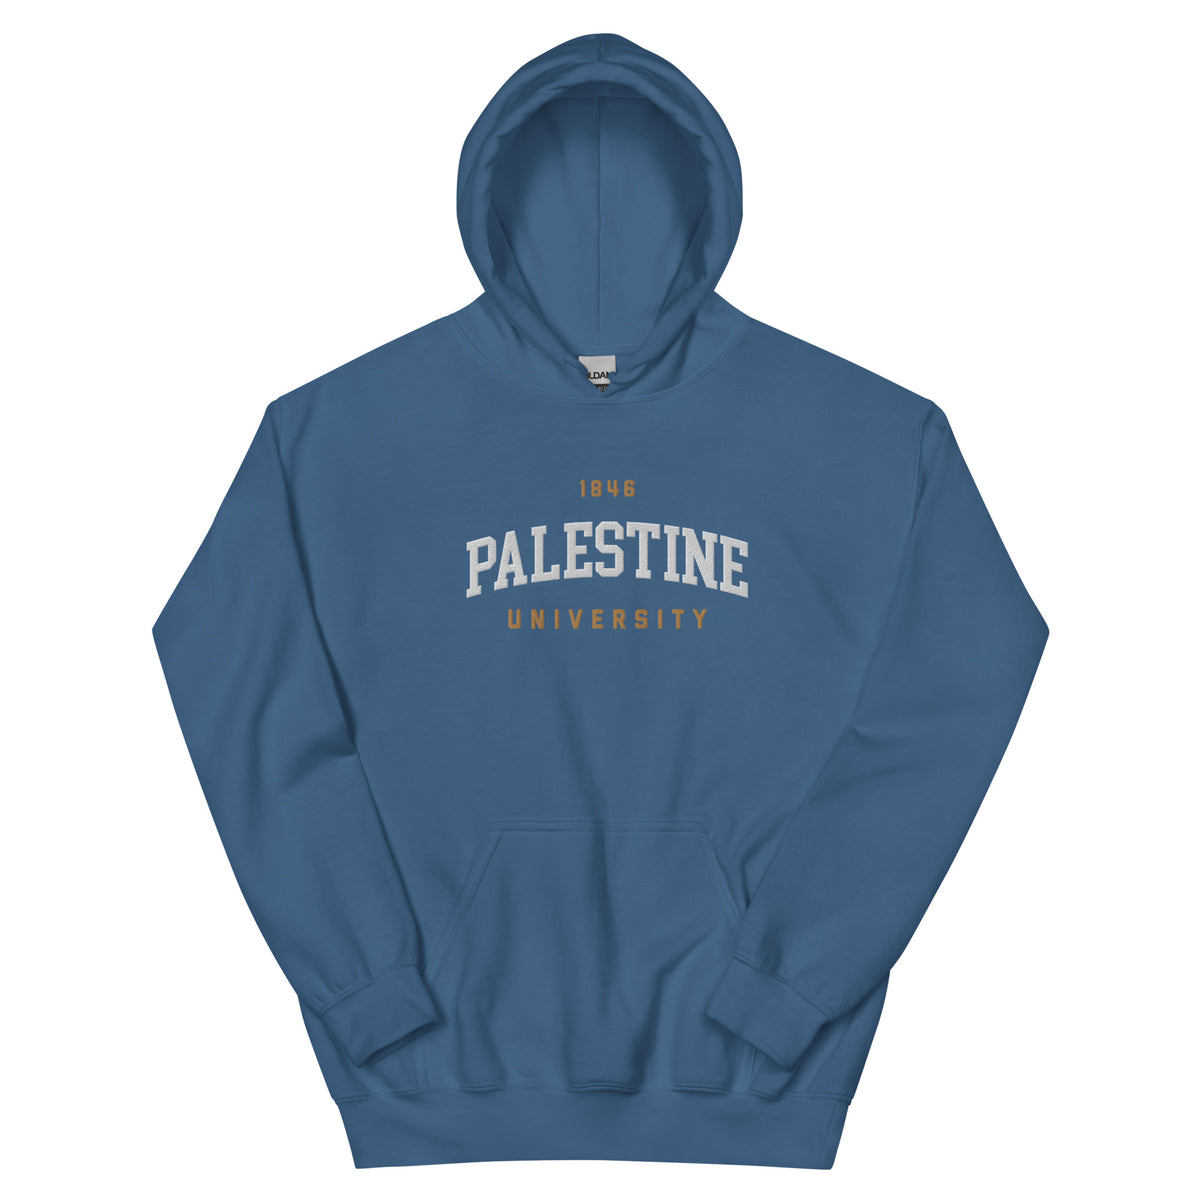 Palestine University 1846 hoodie in blue by Dar Collective